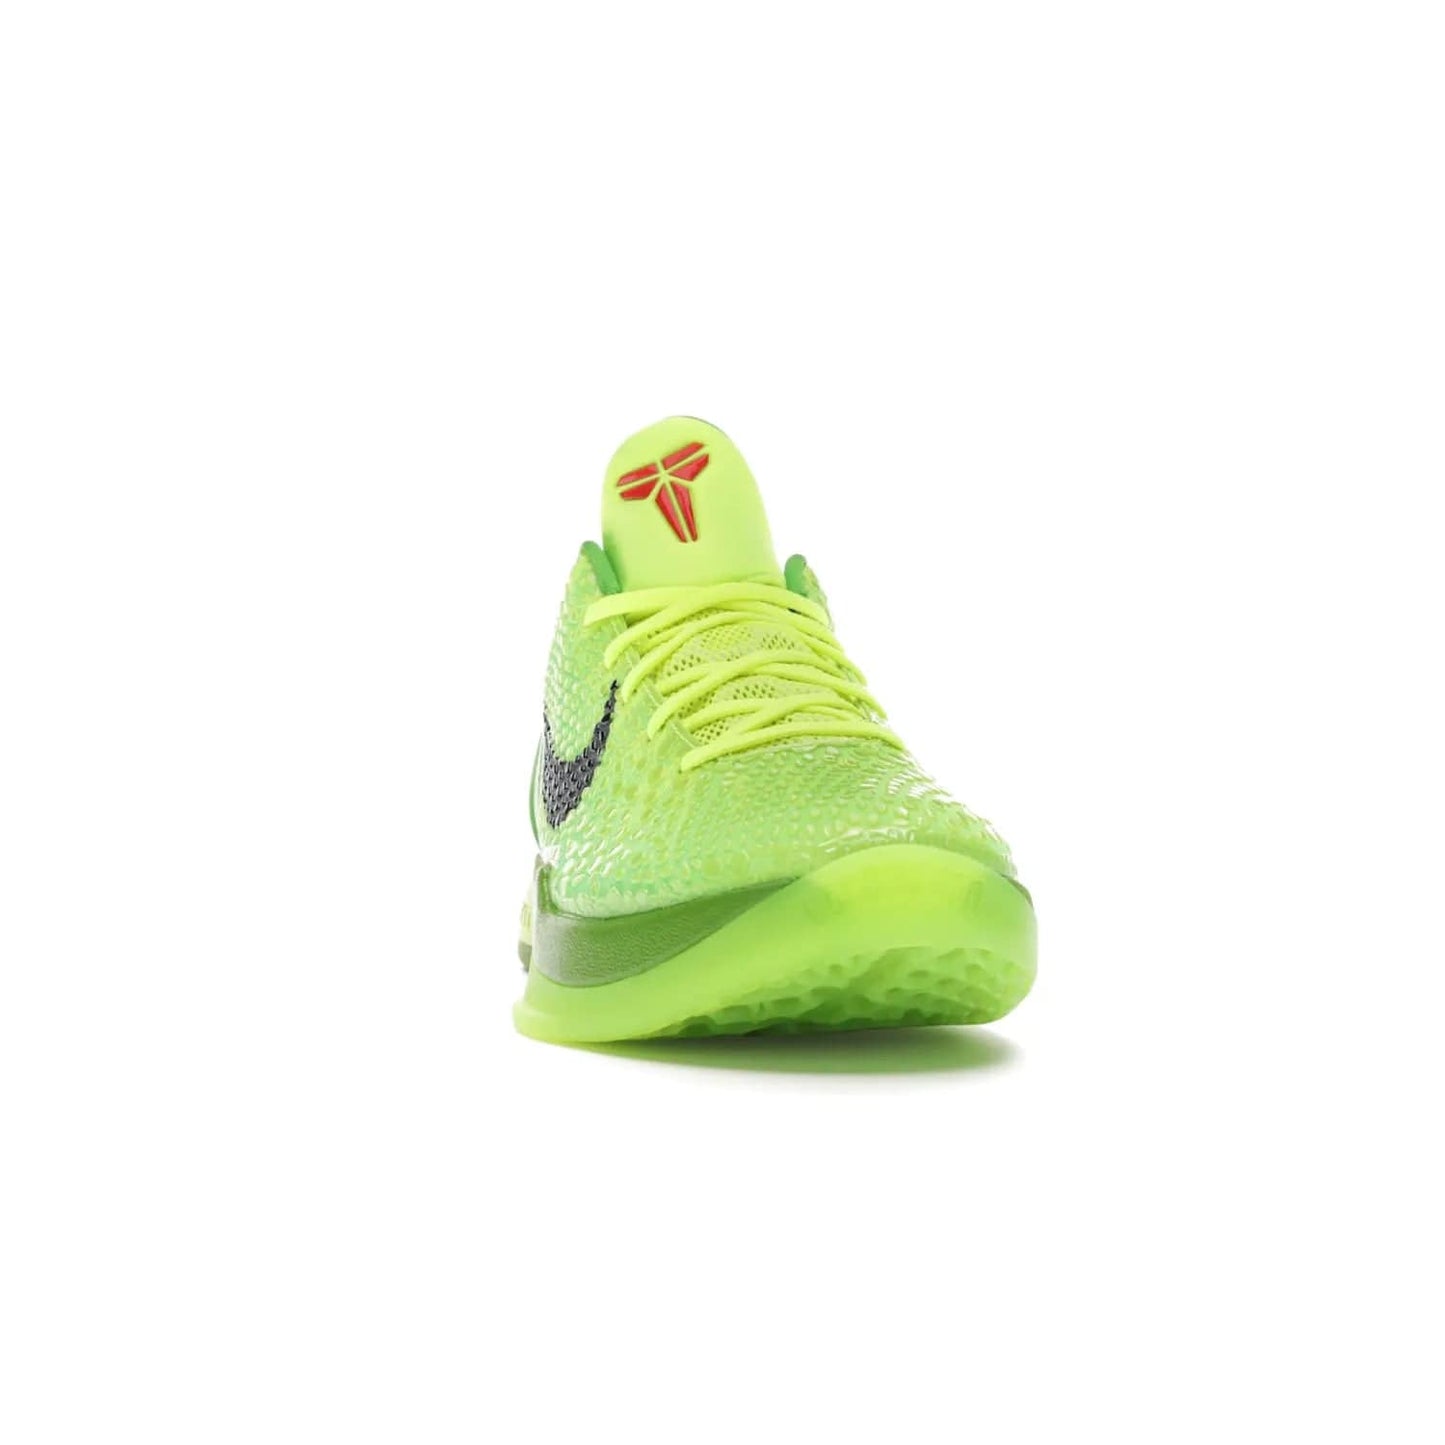 Nike Kobe 6 Protro Grinch (2020) - Image 9 - Only at www.BallersClubKickz.com - #
The Nike Kobe 6 Protro Grinch updates the iconic 2011 design with modern tech like a Zoom Air cushioning system, scaled-down traction, and updated silhouette. Experience the textured Green Apple and Volt upper plus bright red and green accents for $180.